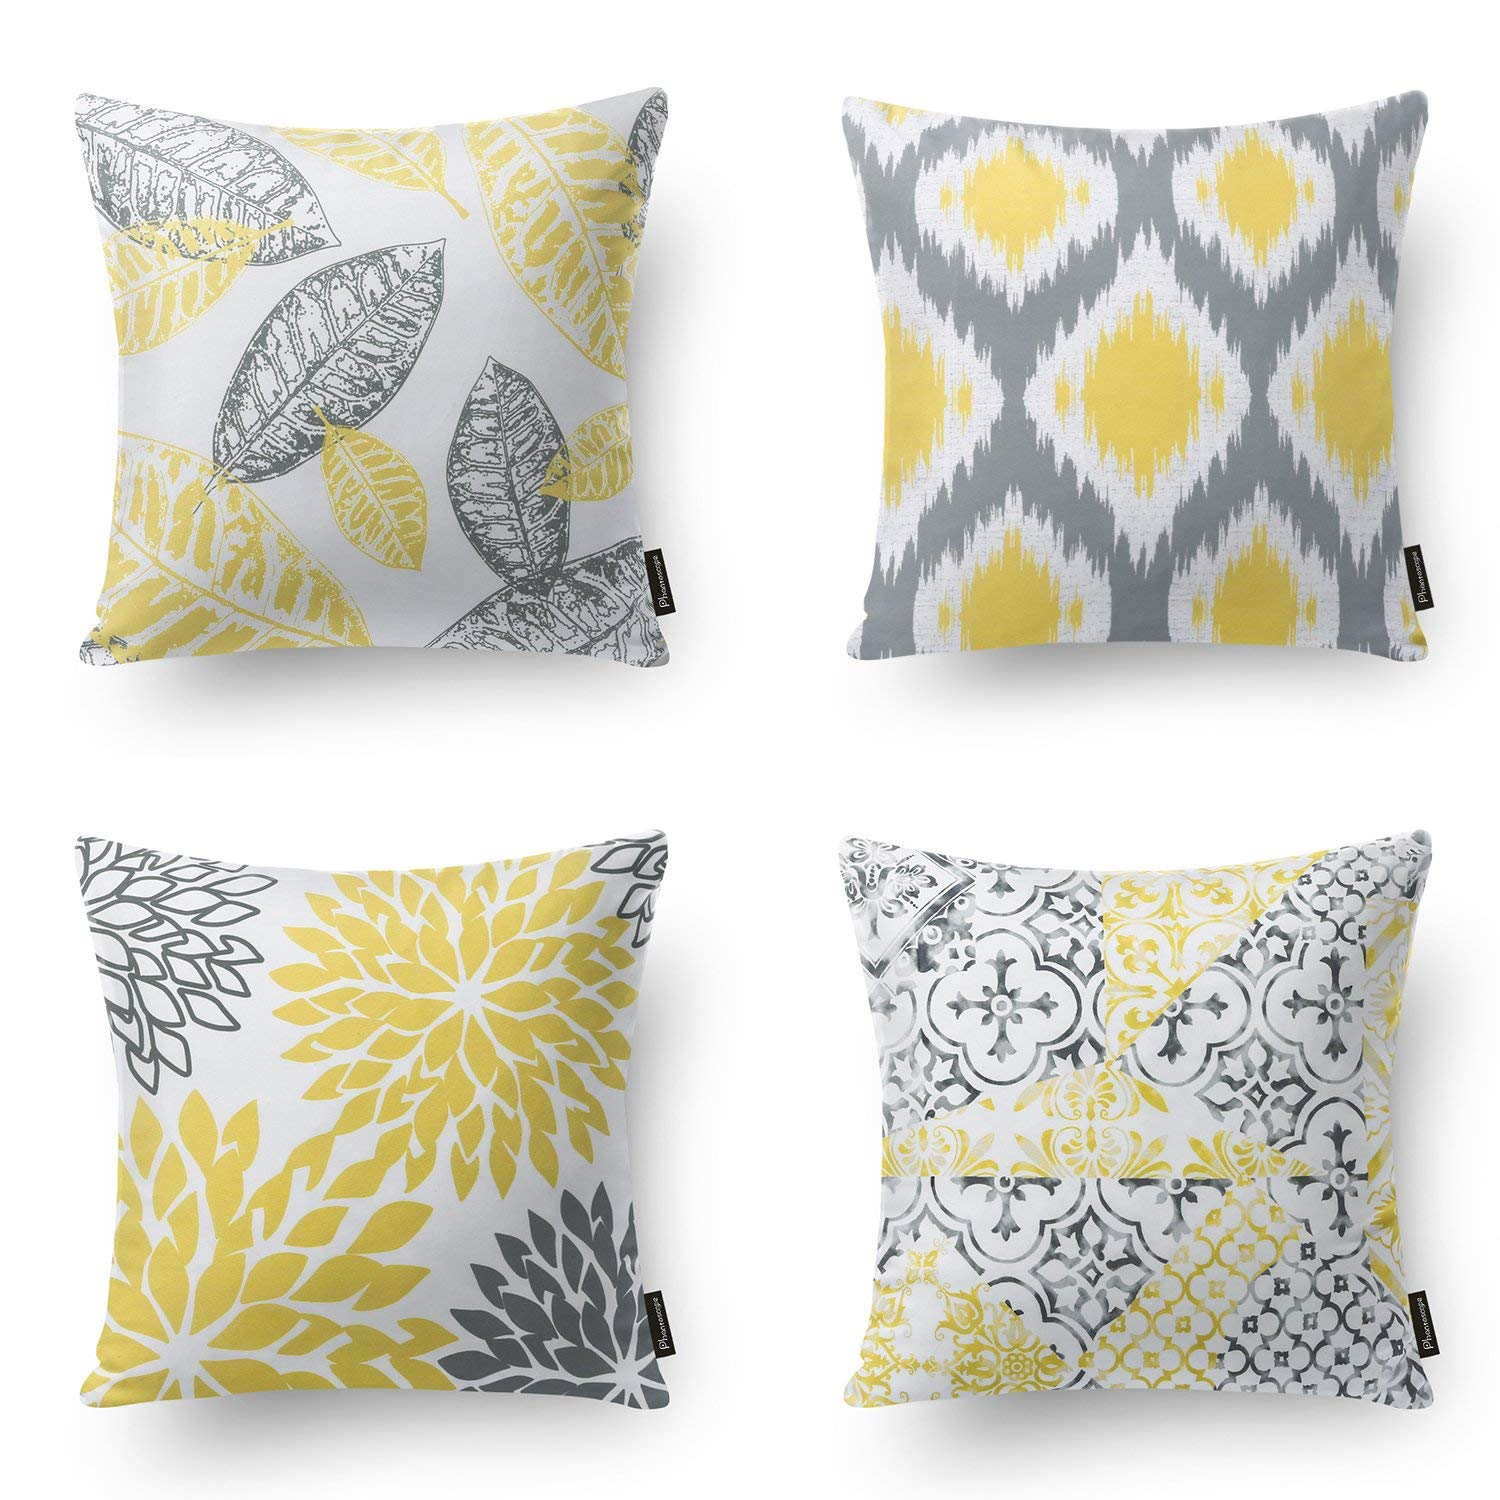 AENEY Pillow Covers 18x18 Inch Set of 4 Modern Throw Pillow Covers Home Sweet Home Geometry Floral Arrow Outdoor Decorative Pillows Case Home Decor Pillowcsae for Couch Sofa Yellow